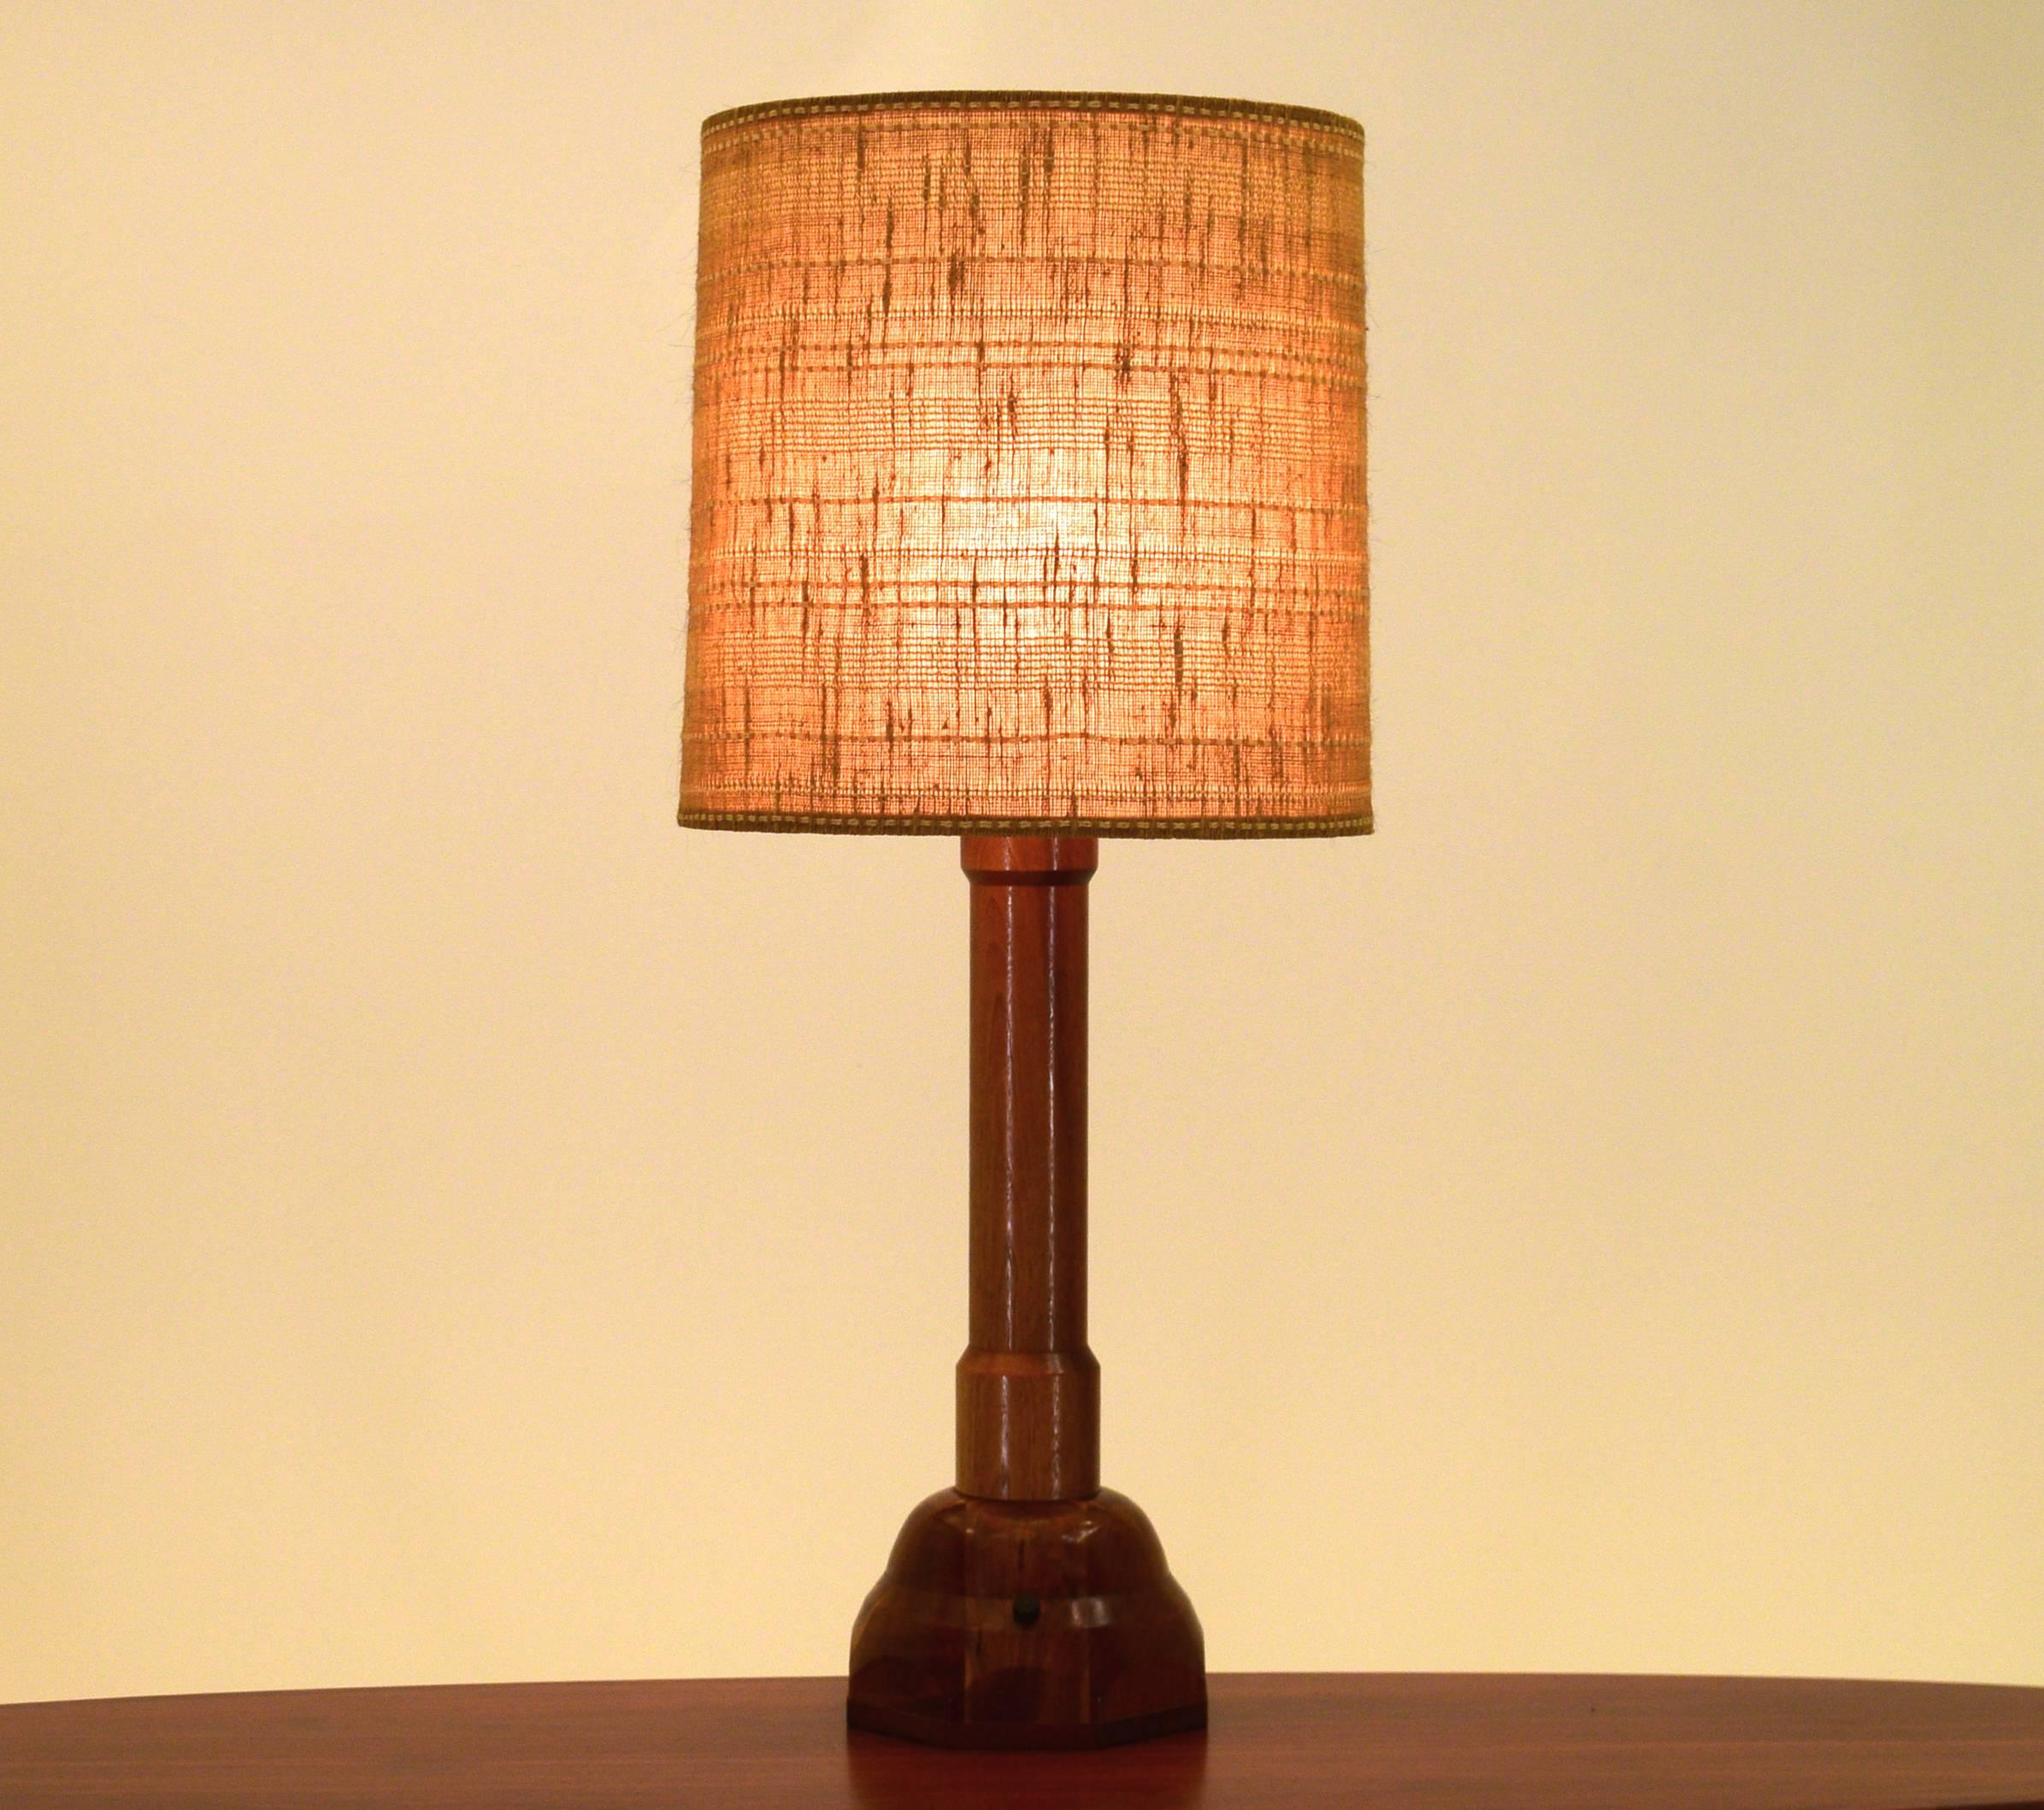 This table lamp was custom-made by cabinet maker R G Busby for a client in 1973, it is one of a kind and unique. It has a very large hexagonal base that supports a solid column much like a balustrade. The base is comprised of blocks of walnut and